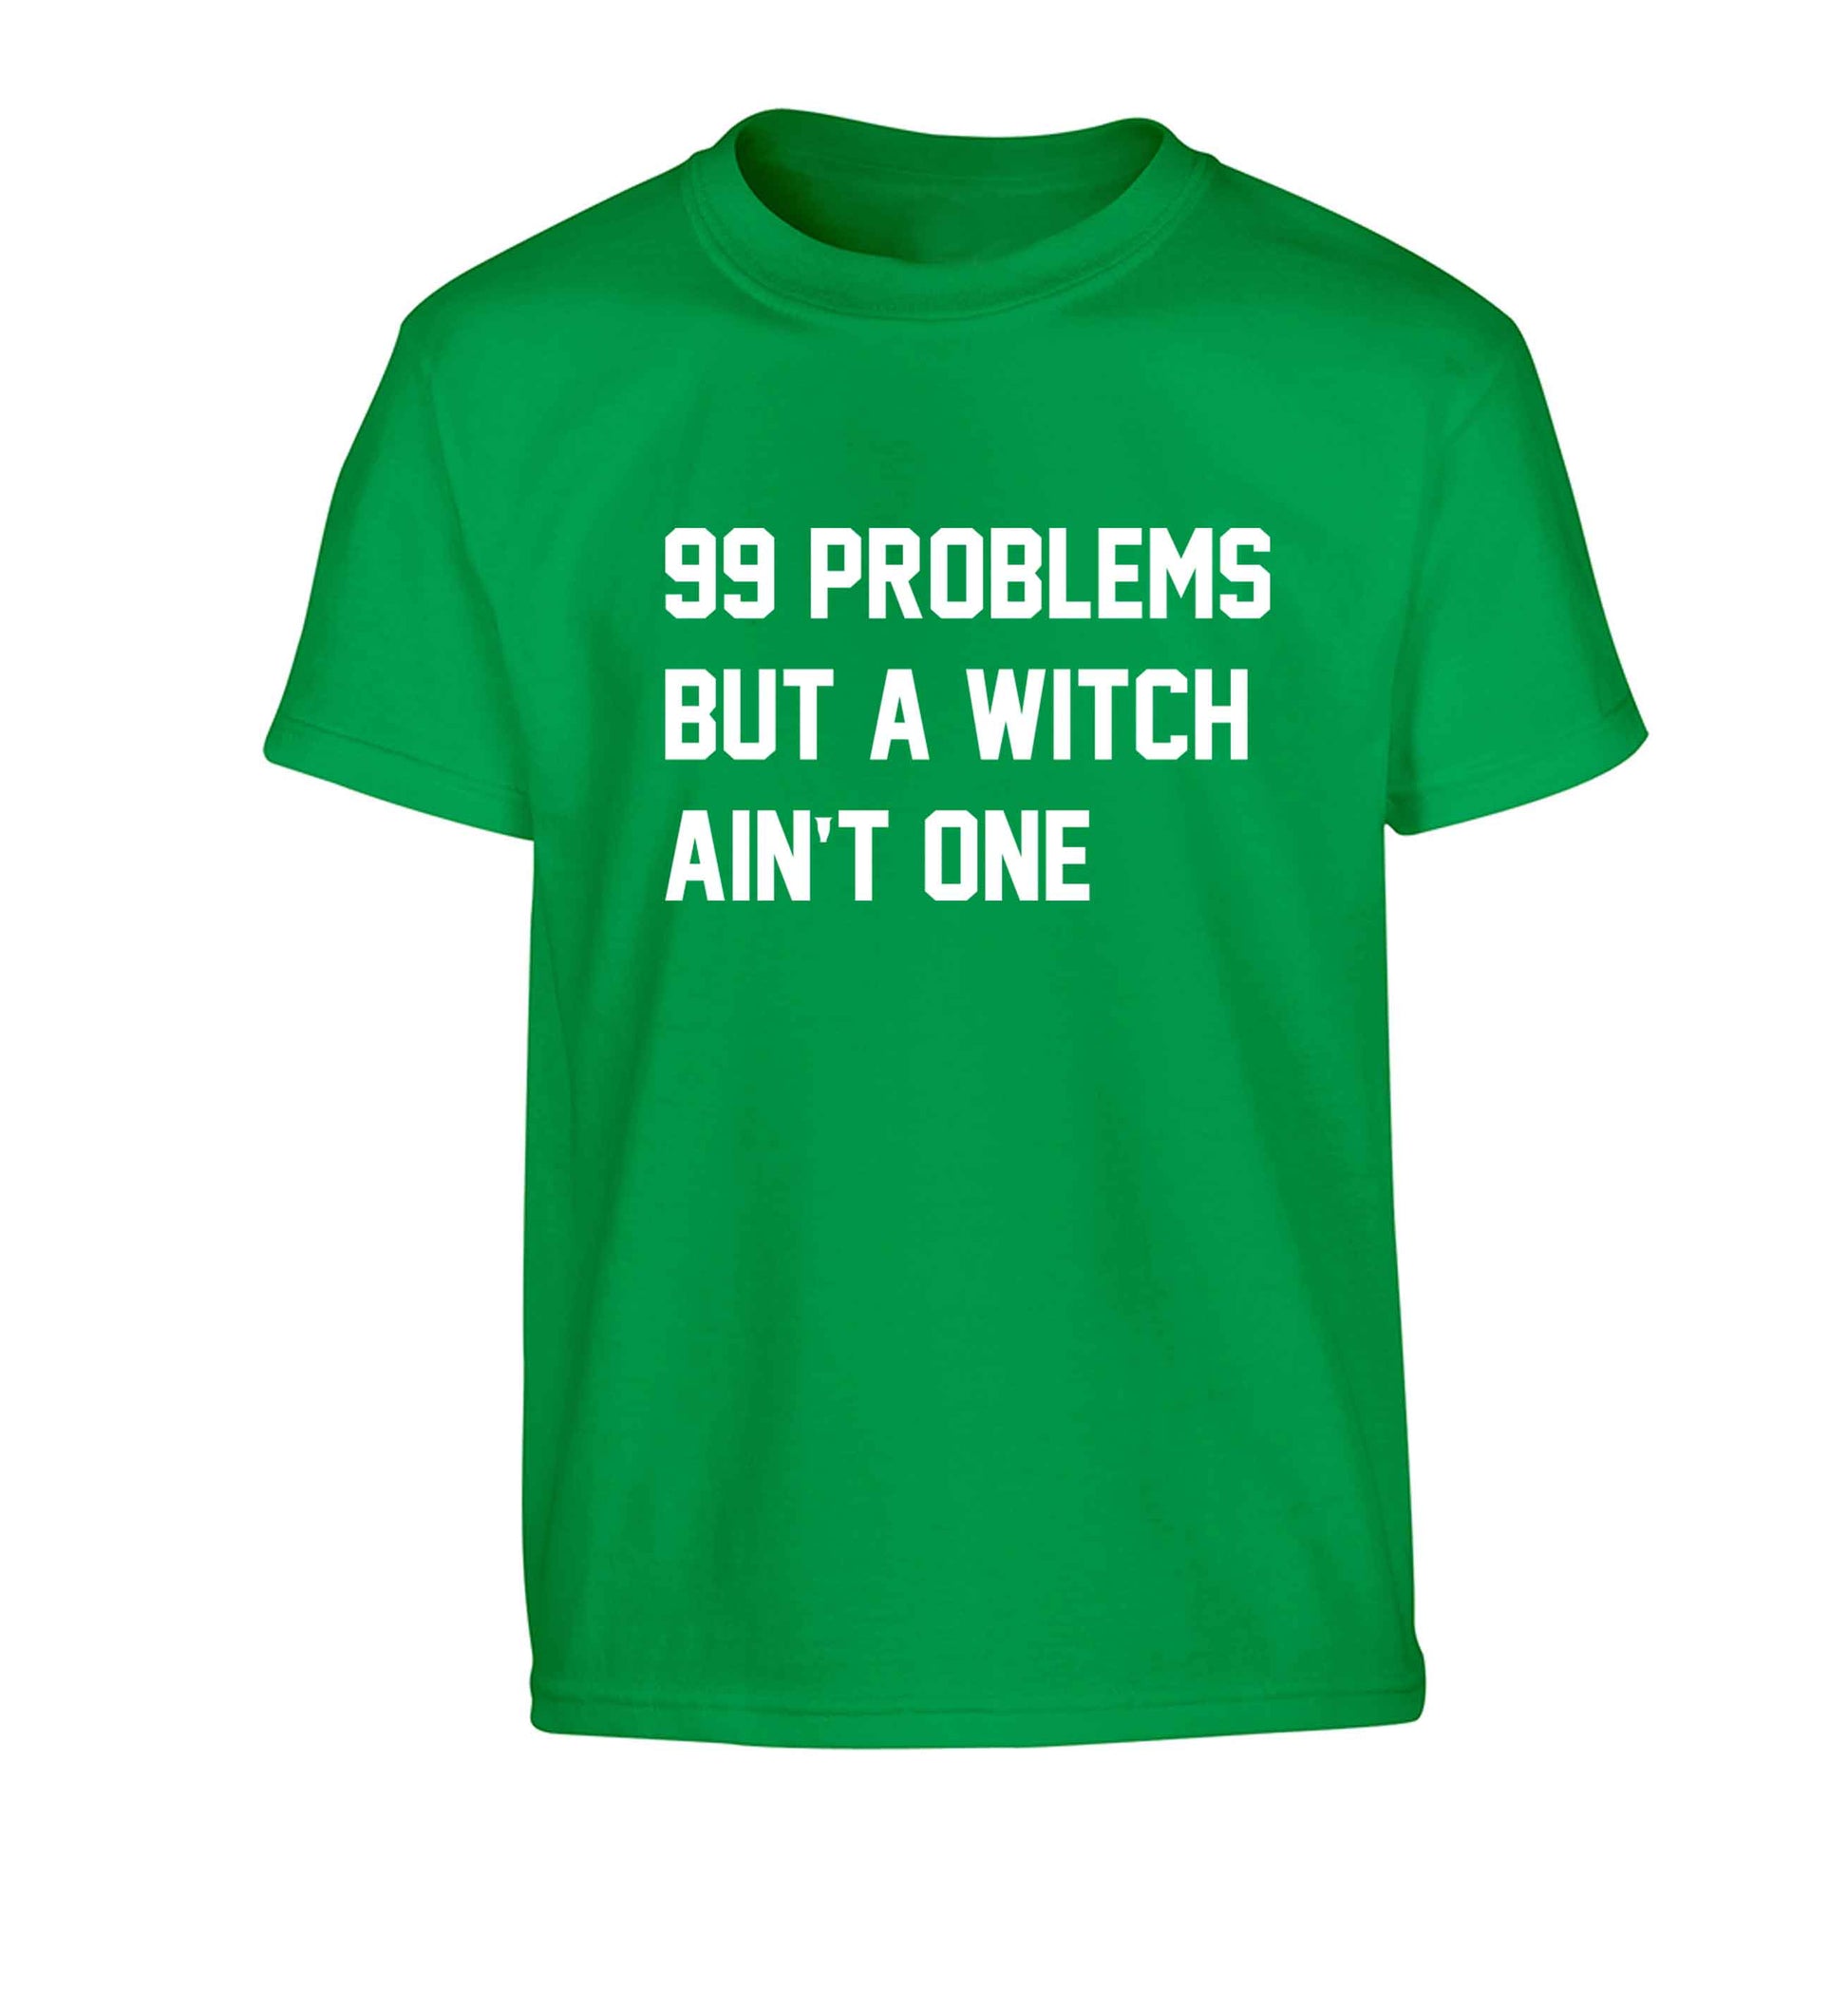 99 Problems but a witch aint one Children's green Tshirt 12-13 Years